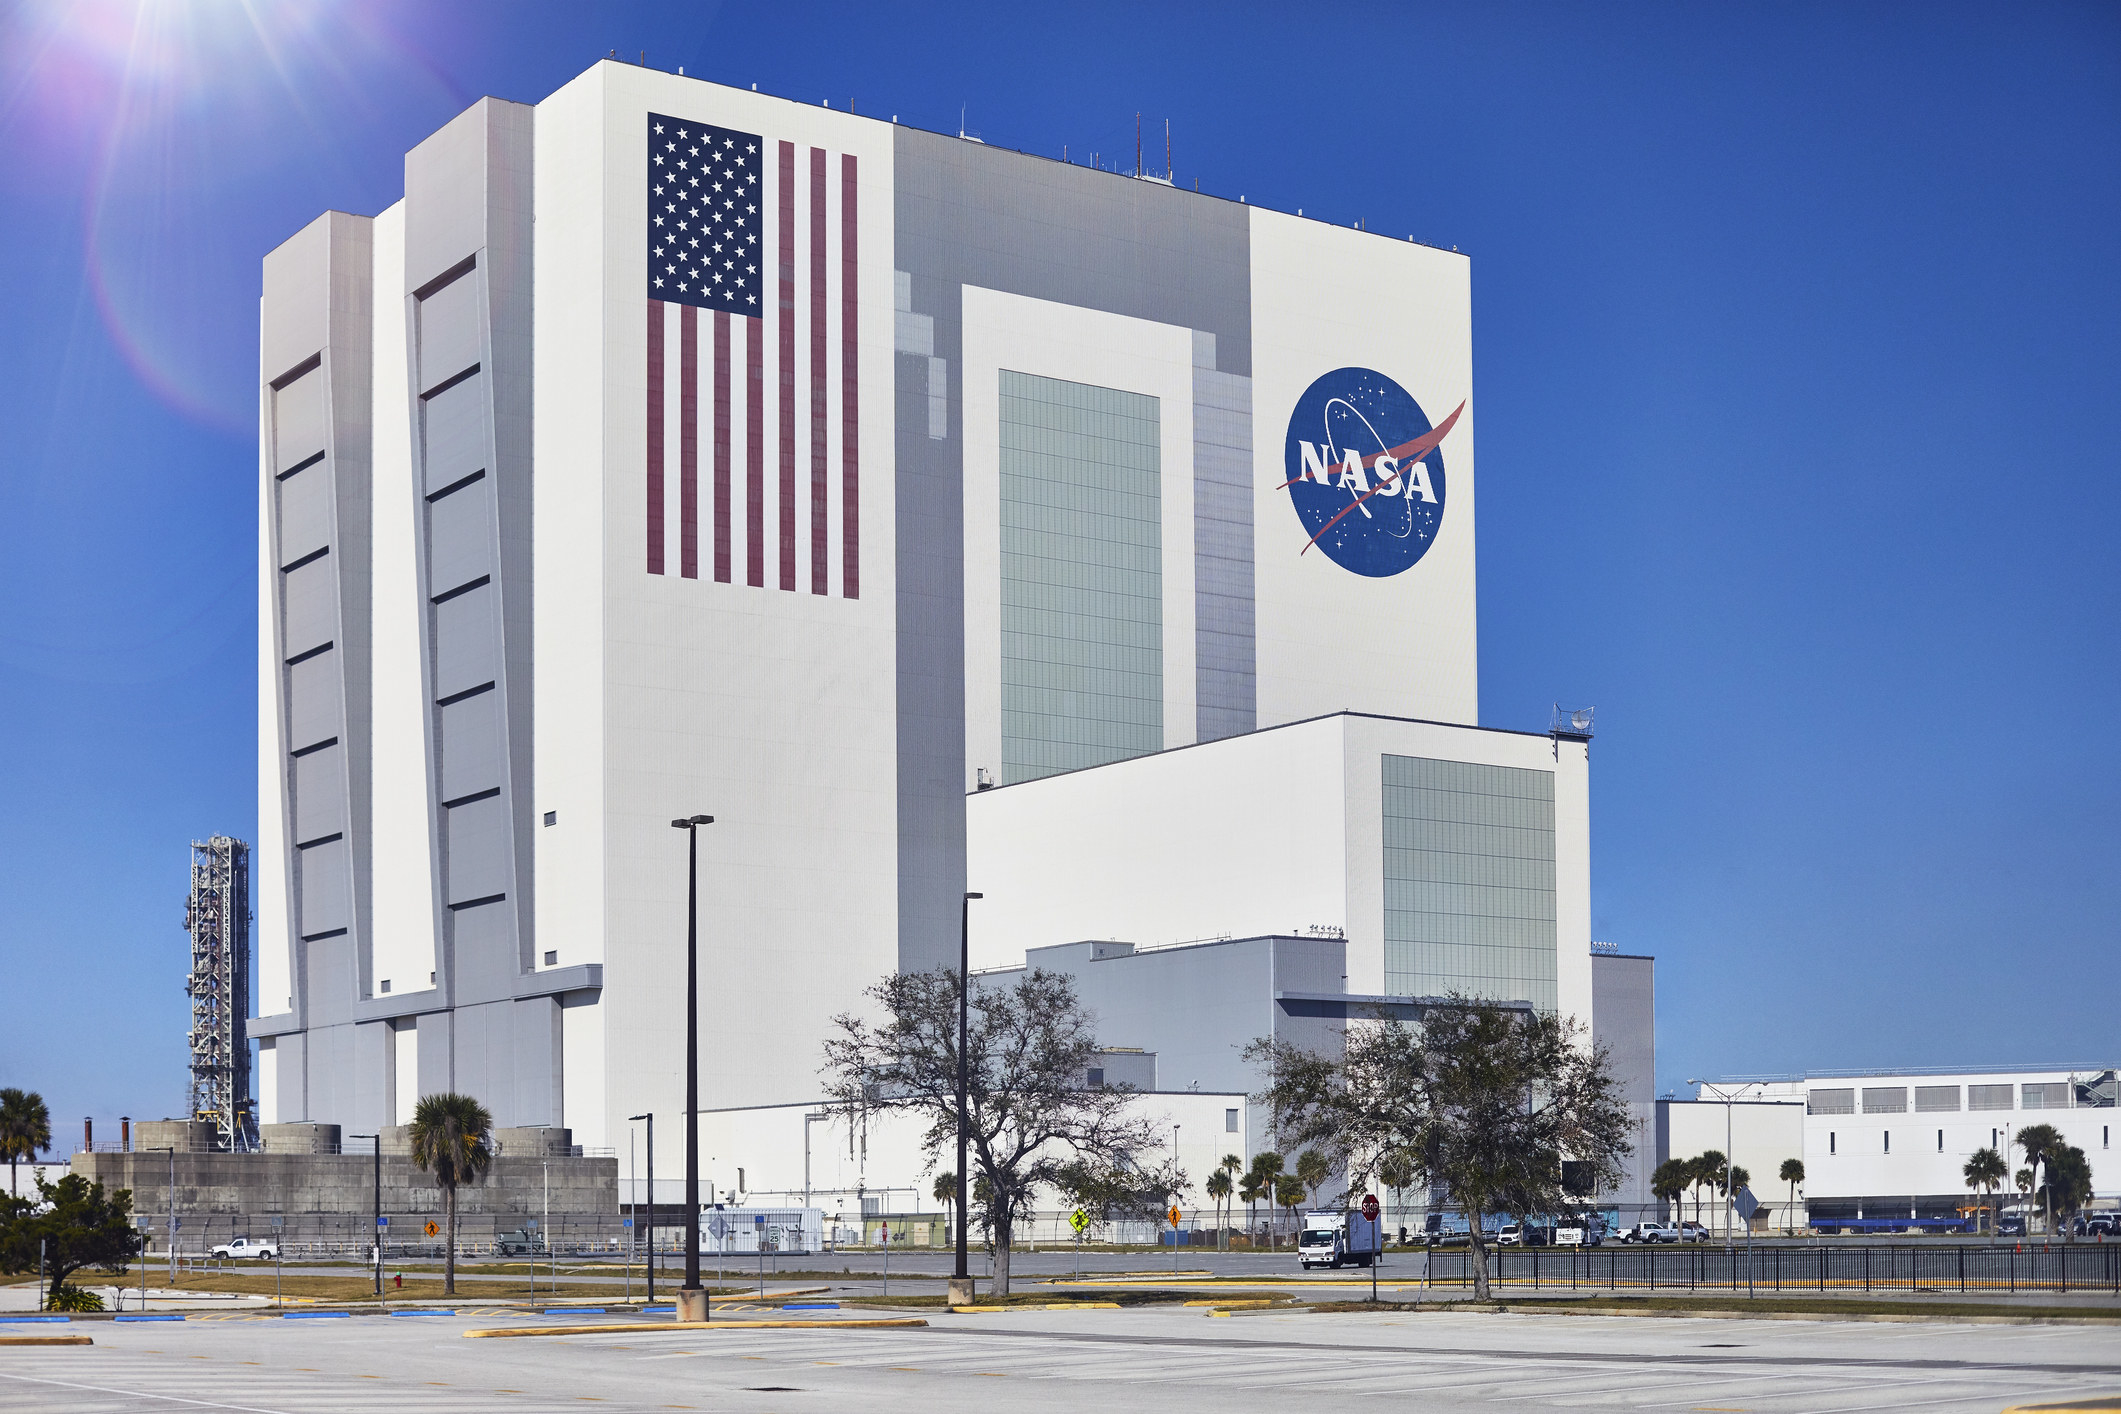 NASA building at Kennedy Space Center.